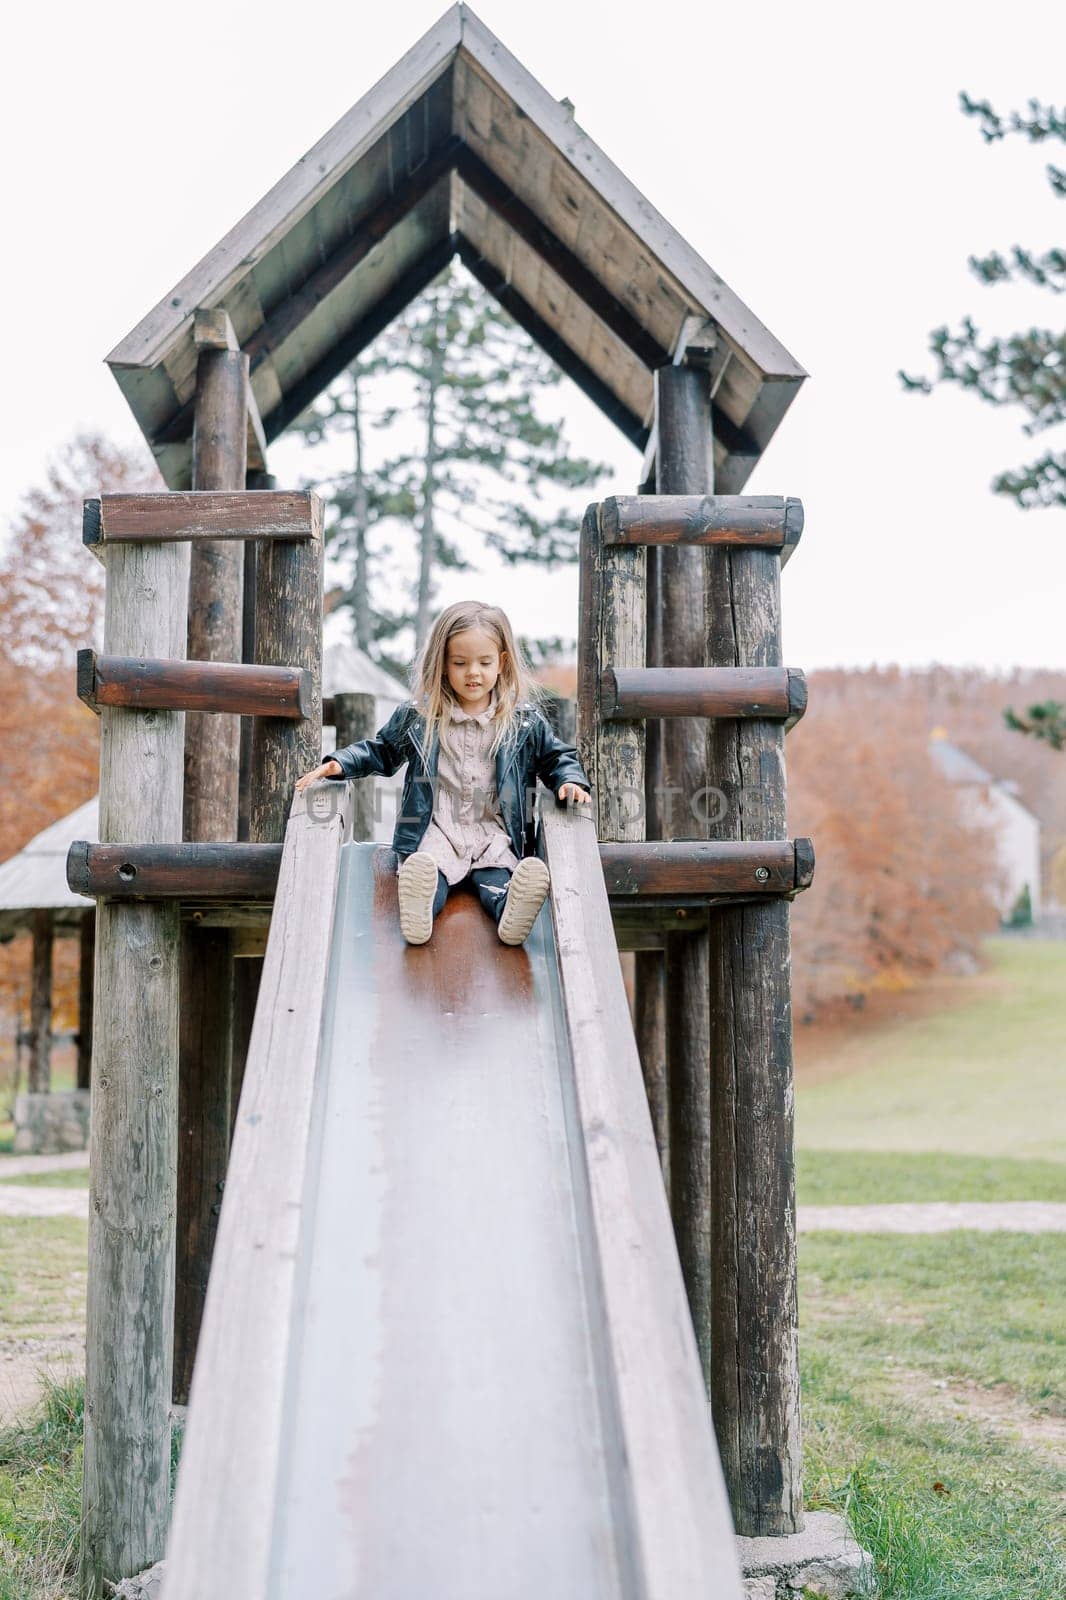 Little girl going down a wooden slide on a playground in a park. High quality photo